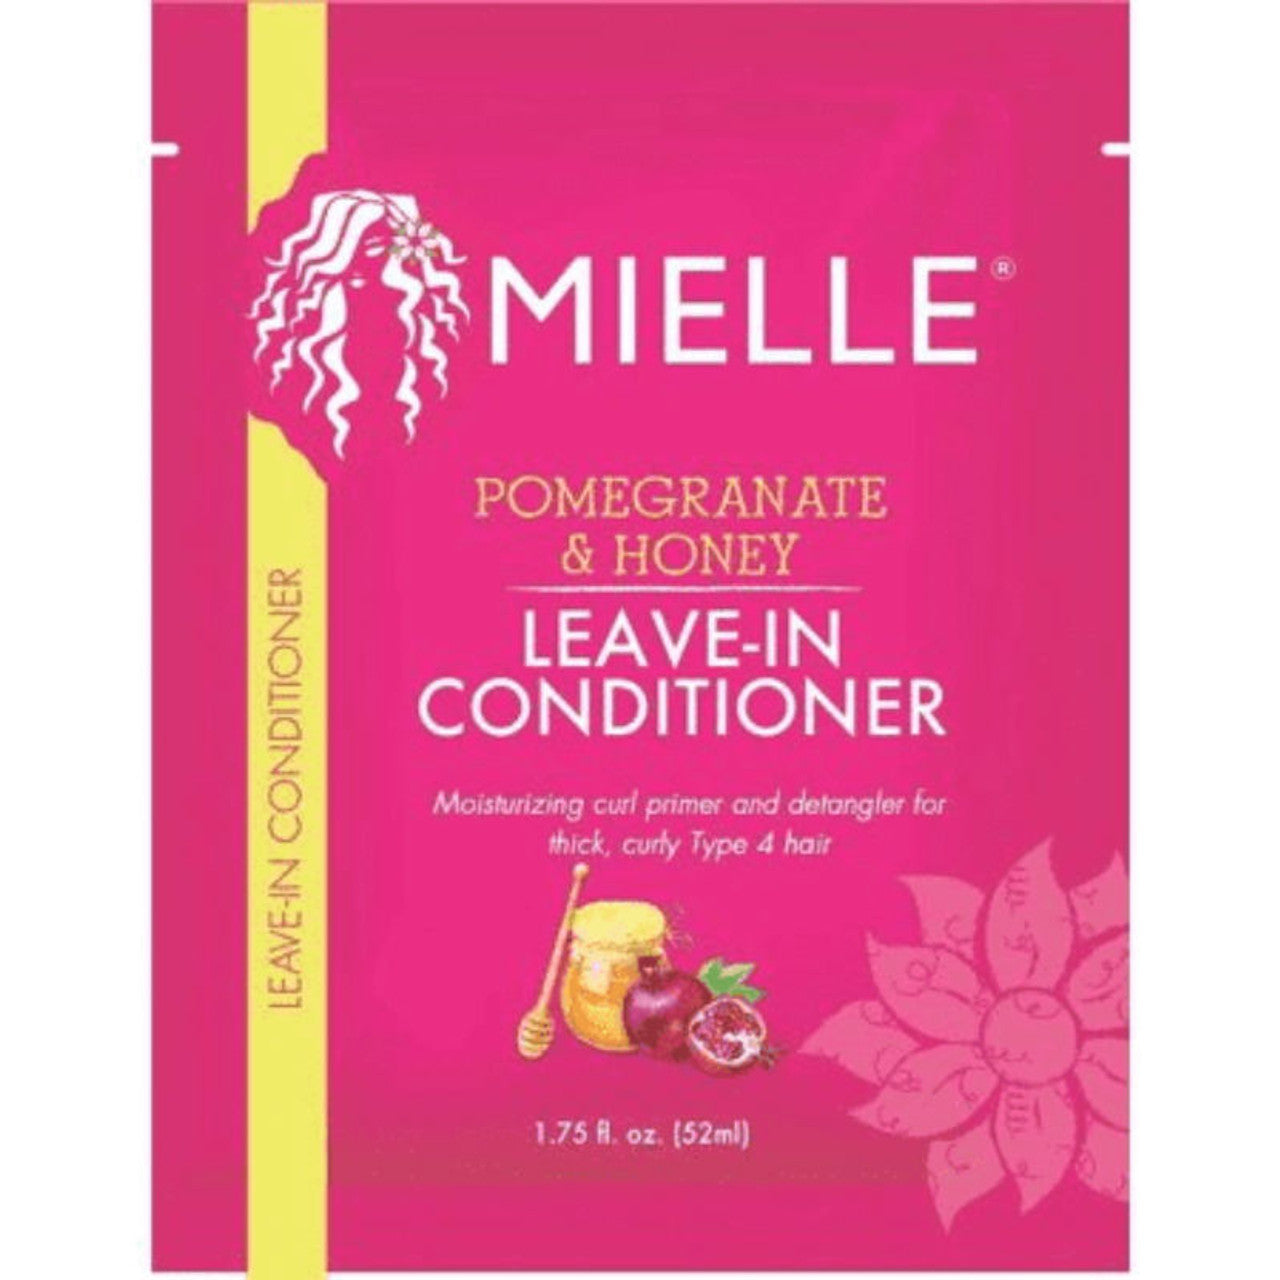 Mielle Pomegranate & Honey Leave-In Conditioner Pack